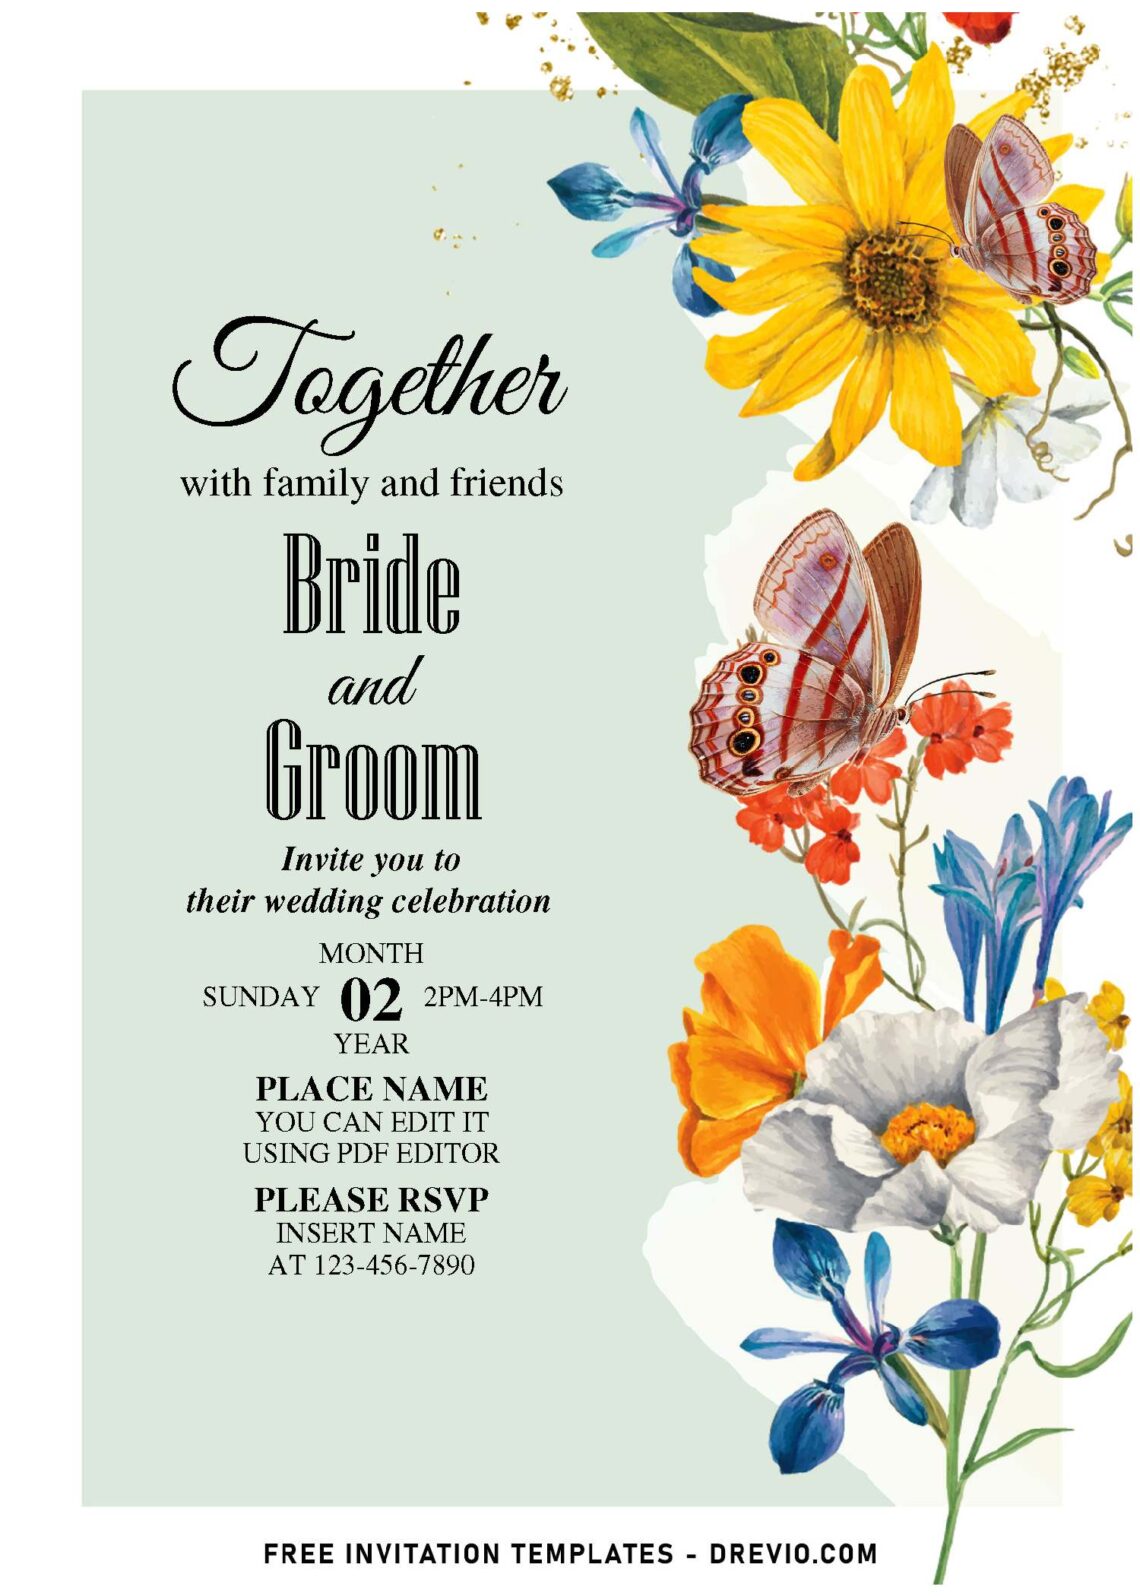 (Free Editable PDF) Heavenly Stunning Colorful Flowers Wedding Invitation Templates with bright yellow sunflower